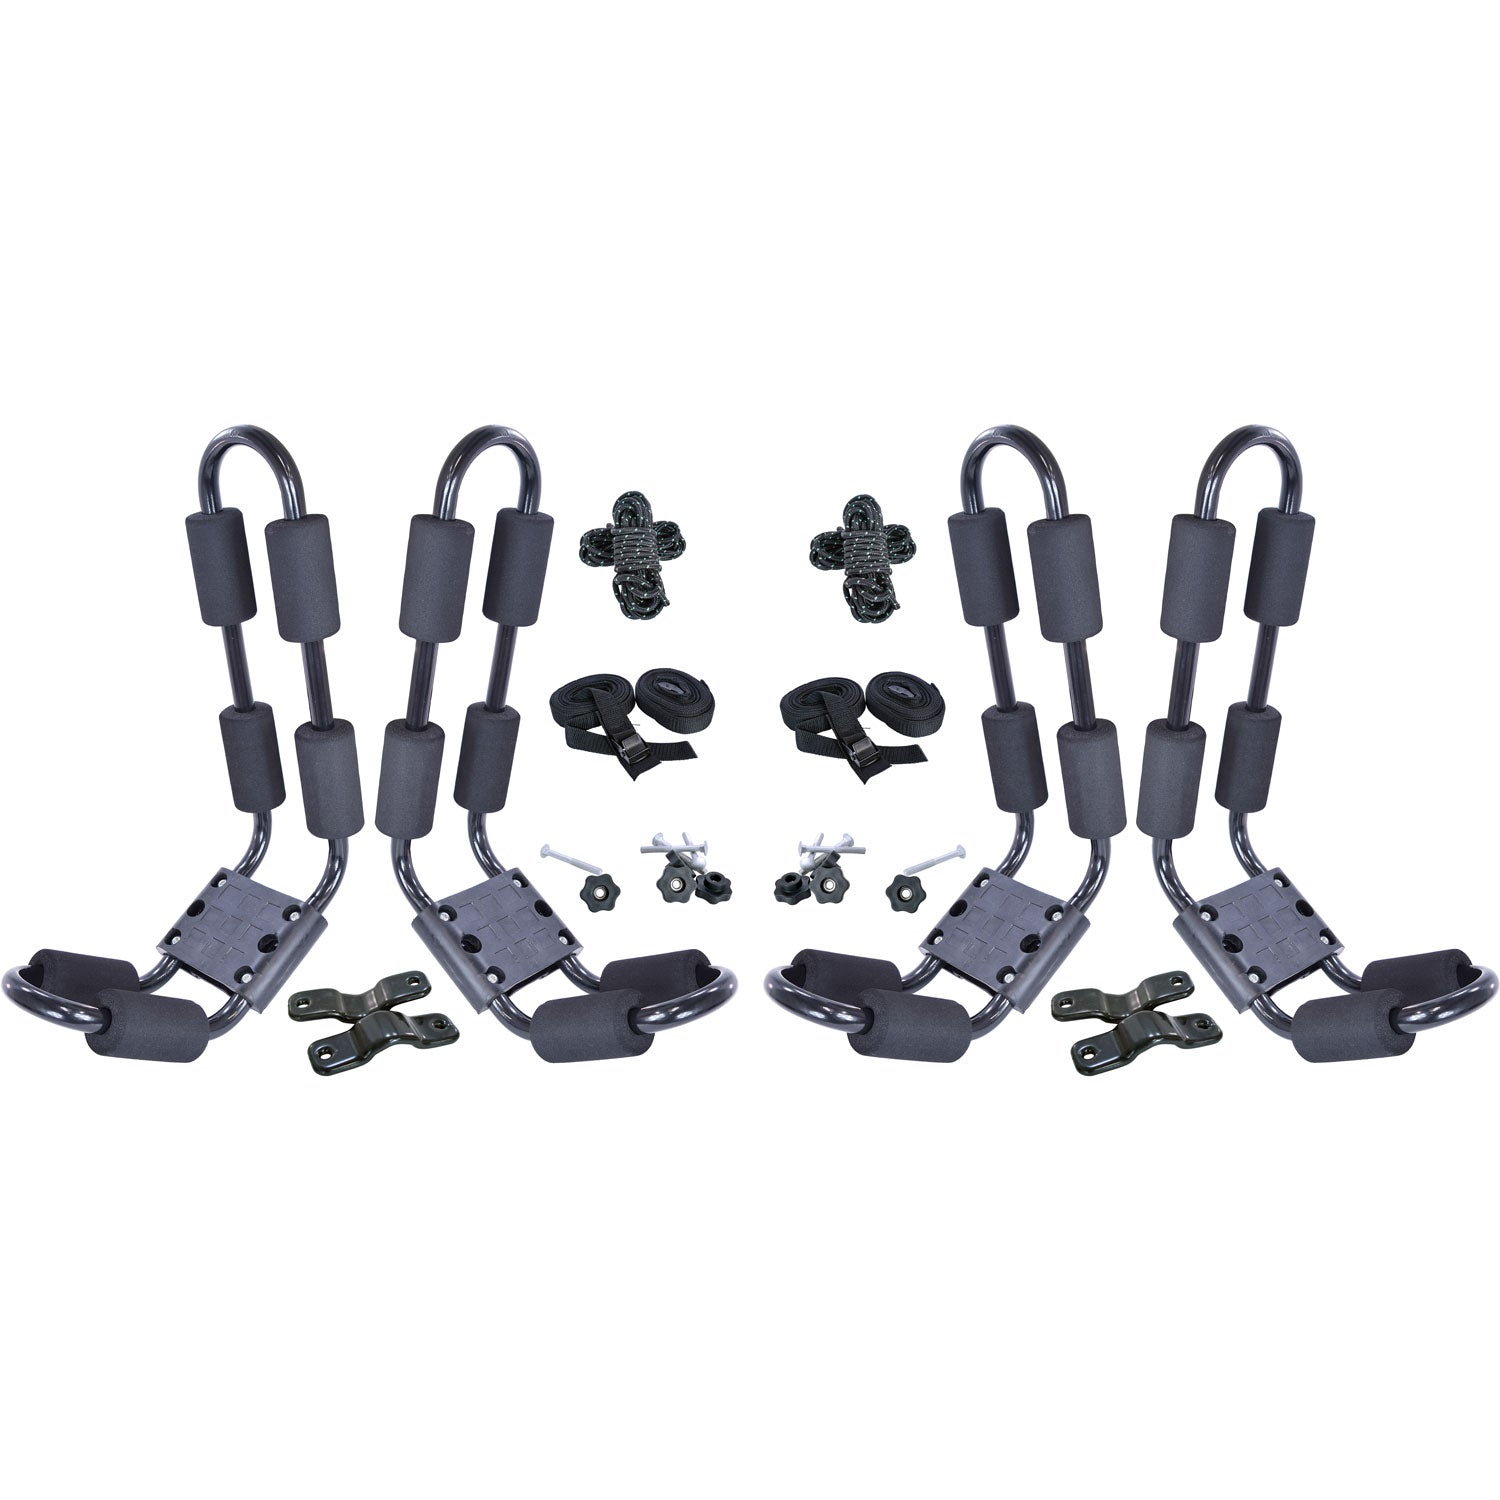 Malone Ecorack Kayak Carrier 2-Pack contents